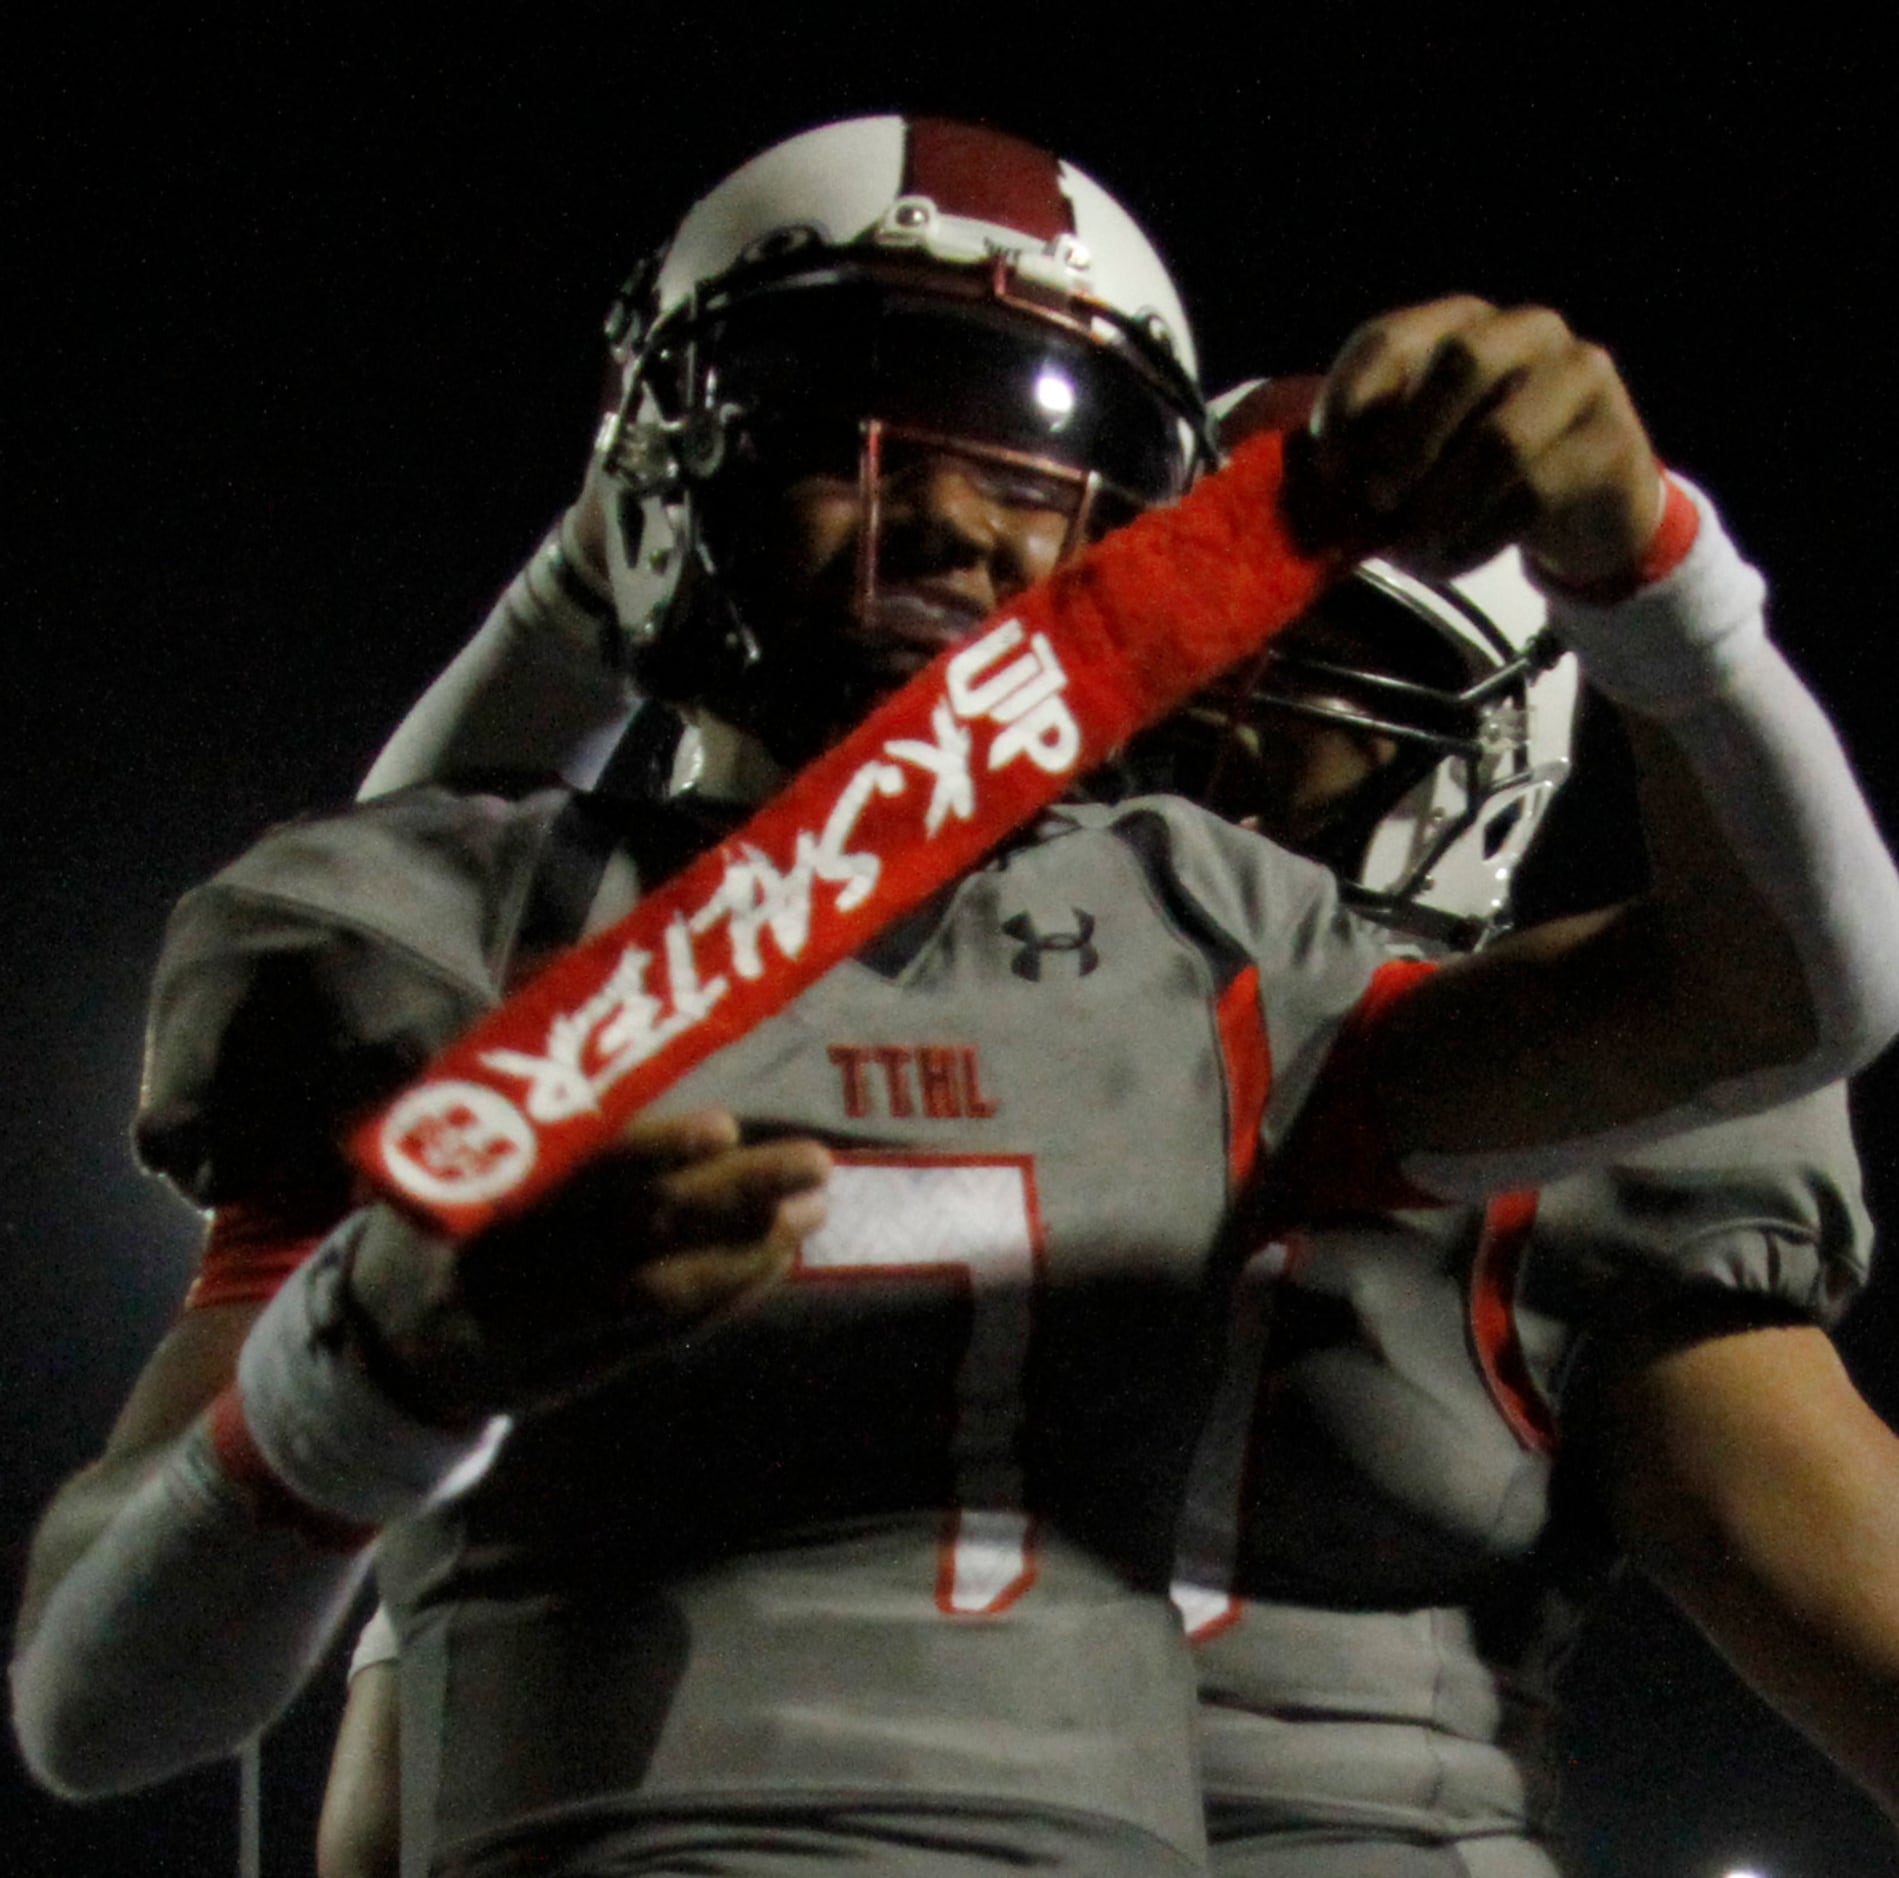 Cedar Hill quarterback Kaidon Salter (7) sports a smile along with a towel which bears his...